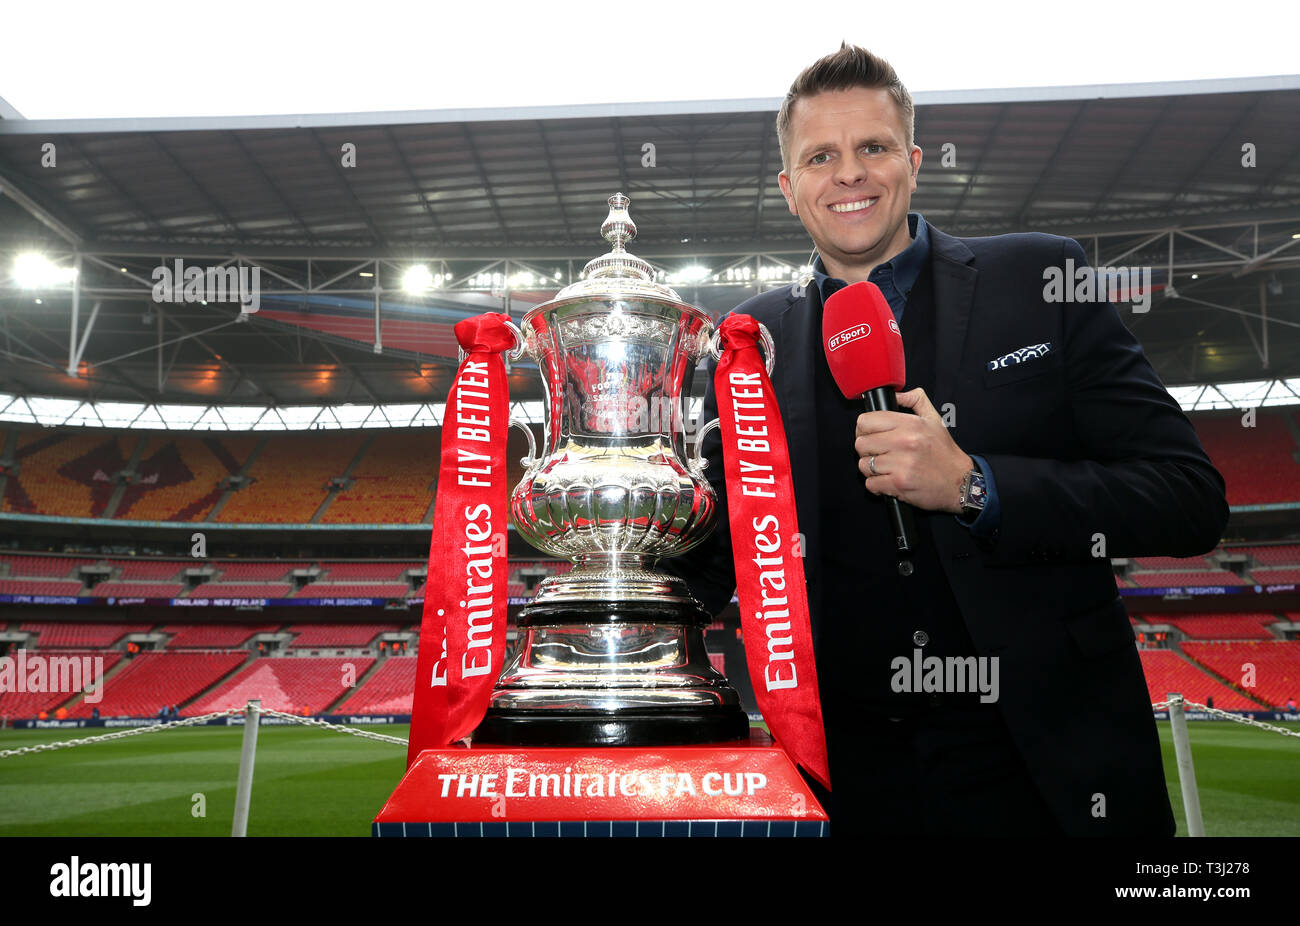 TV presenter Jake Humphrey poses for a photo next to the FA Cup trophy before the FA Cup semi final match at Wembley Stadium, London Stock Photo